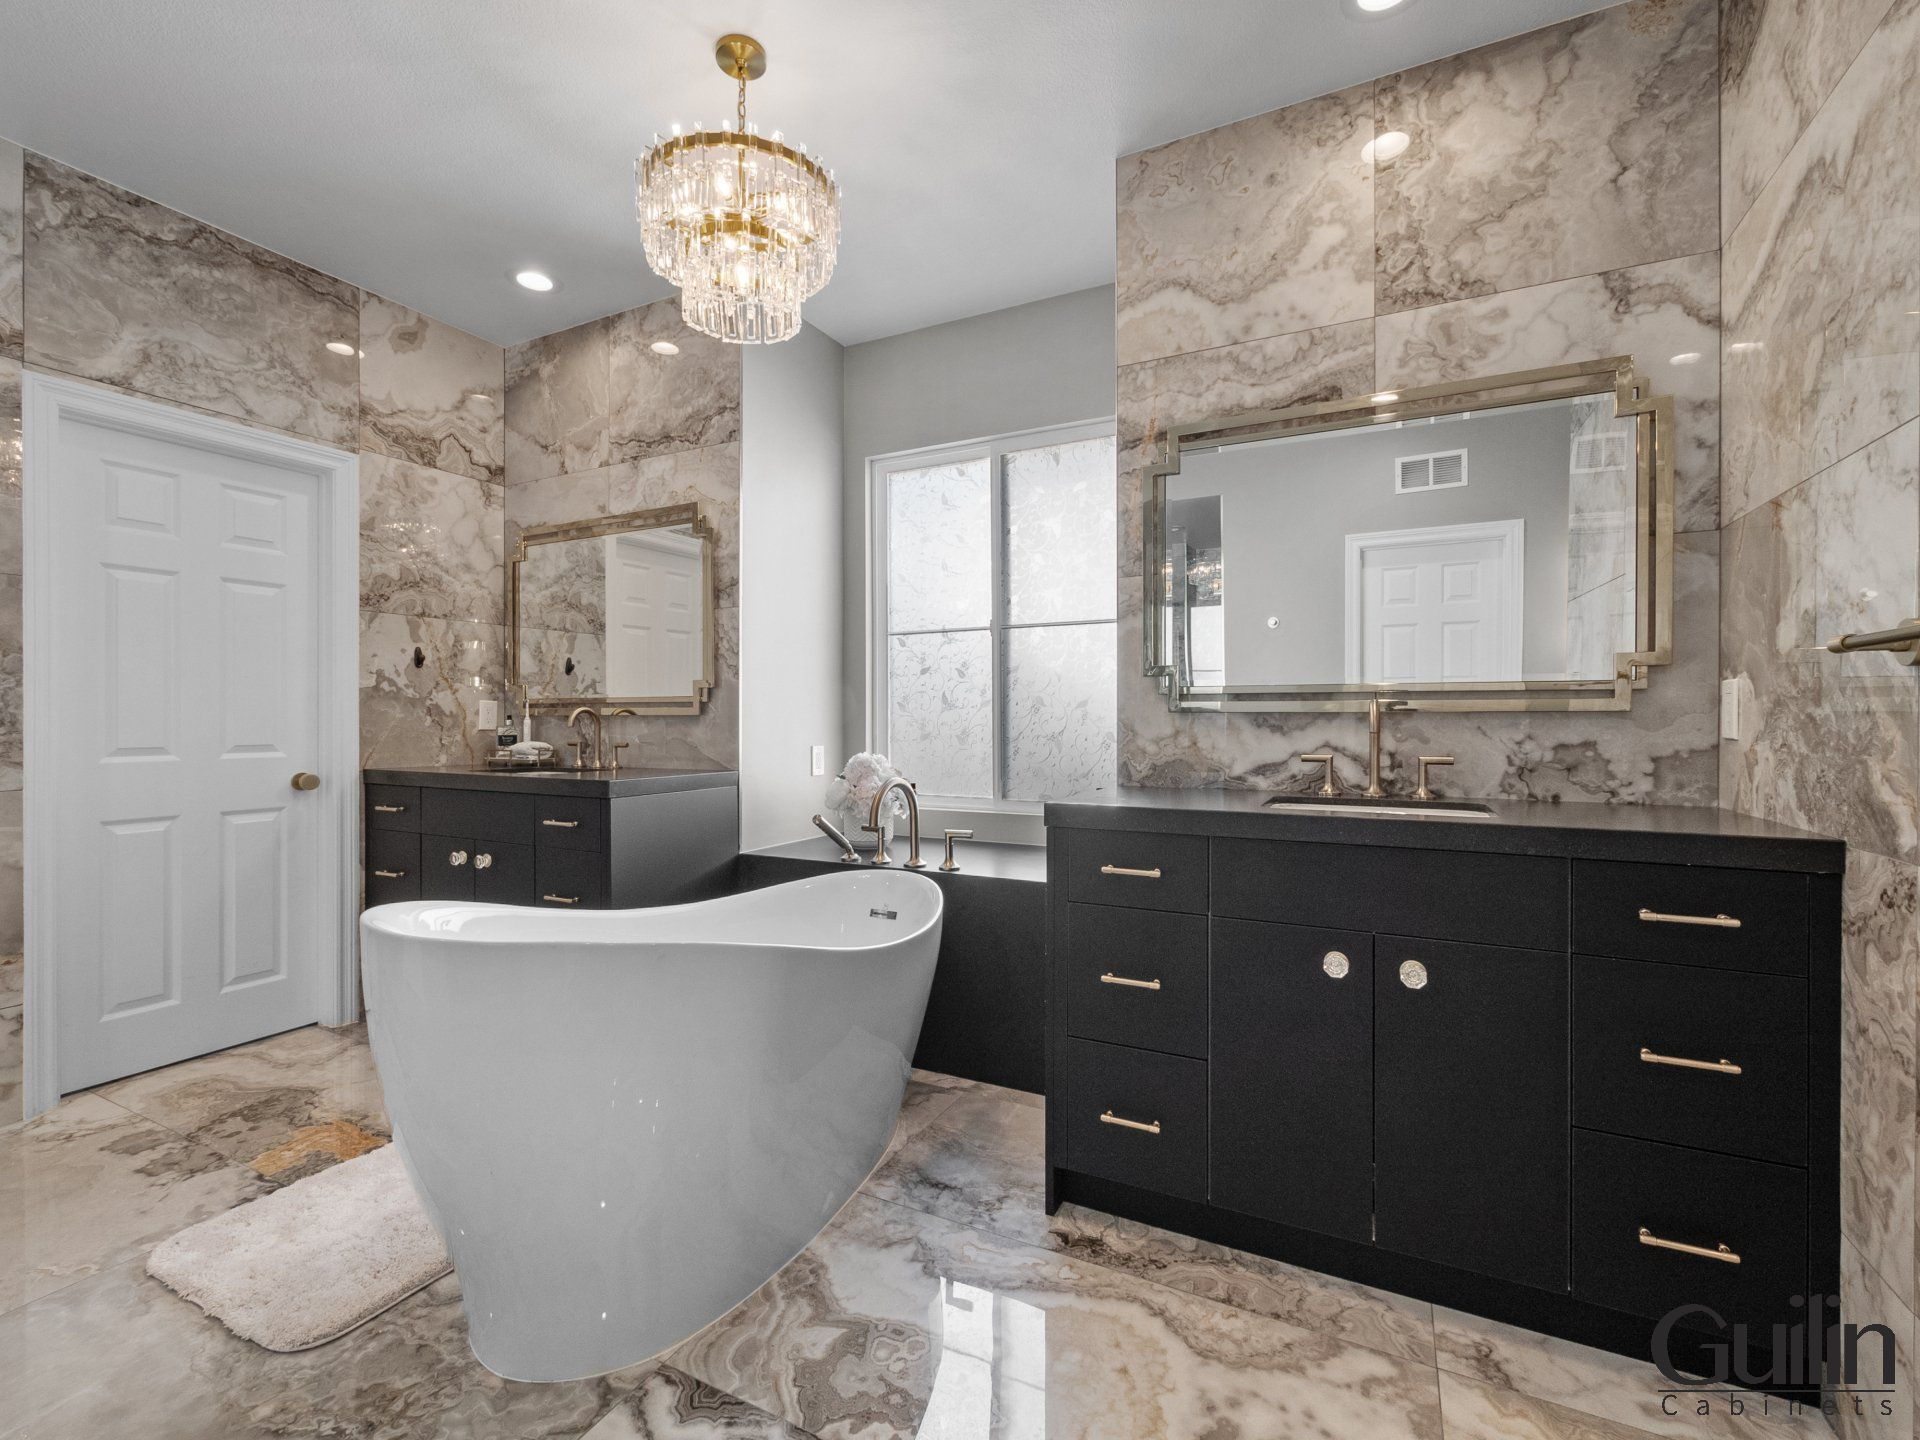 The construction and design of a bathroom vanity significantly impact its weight capacity. 